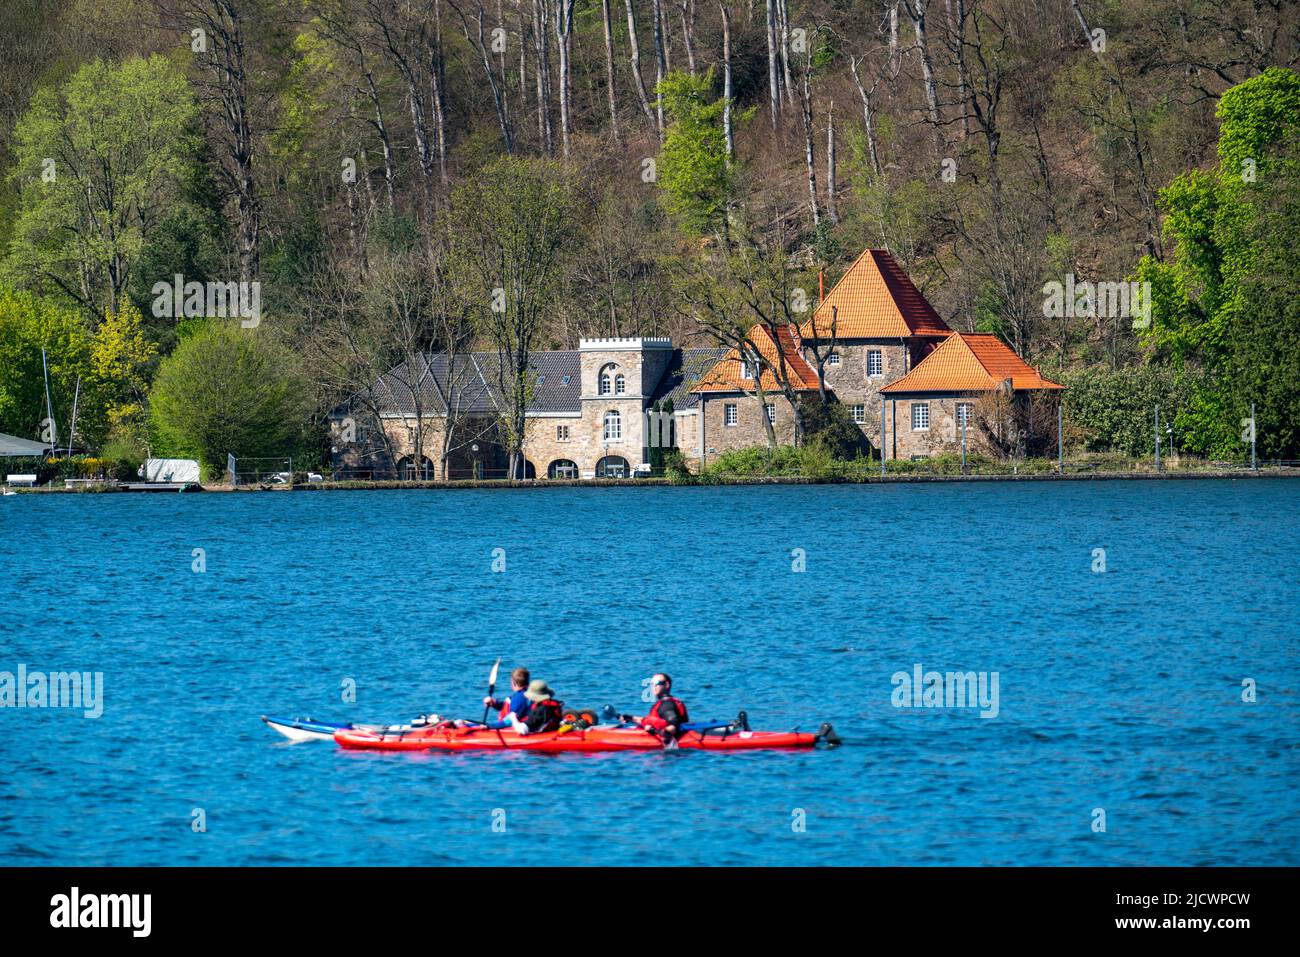 Lake Baldeney, reservoir of the Ruhr, Baldeney Castle, on the right the main building, next to it the coach house, Kayak, Essen, NRW, Germany, Stock Photo